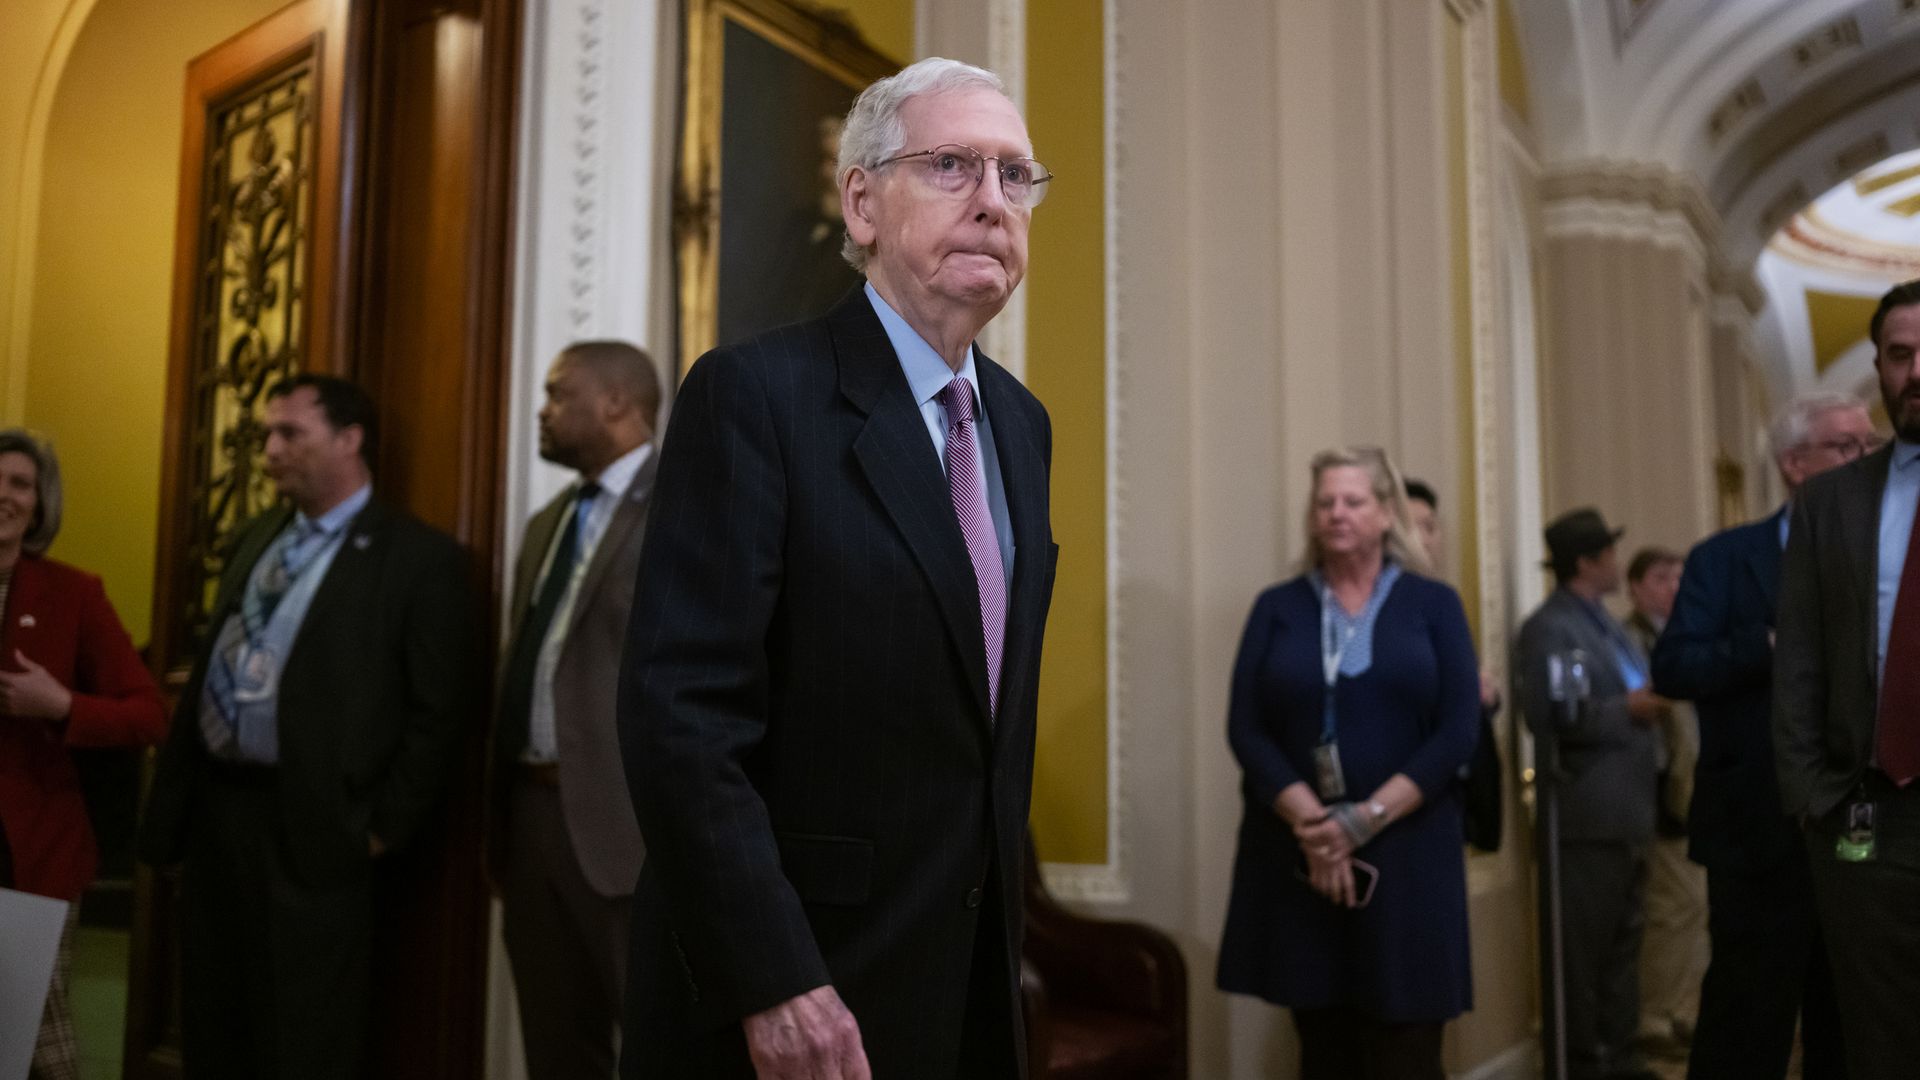 Senate Minority Leader Mitch McConnell, wearing a dark gray suit, light blue shirt and purple tie, walking out of the Senate chamber.